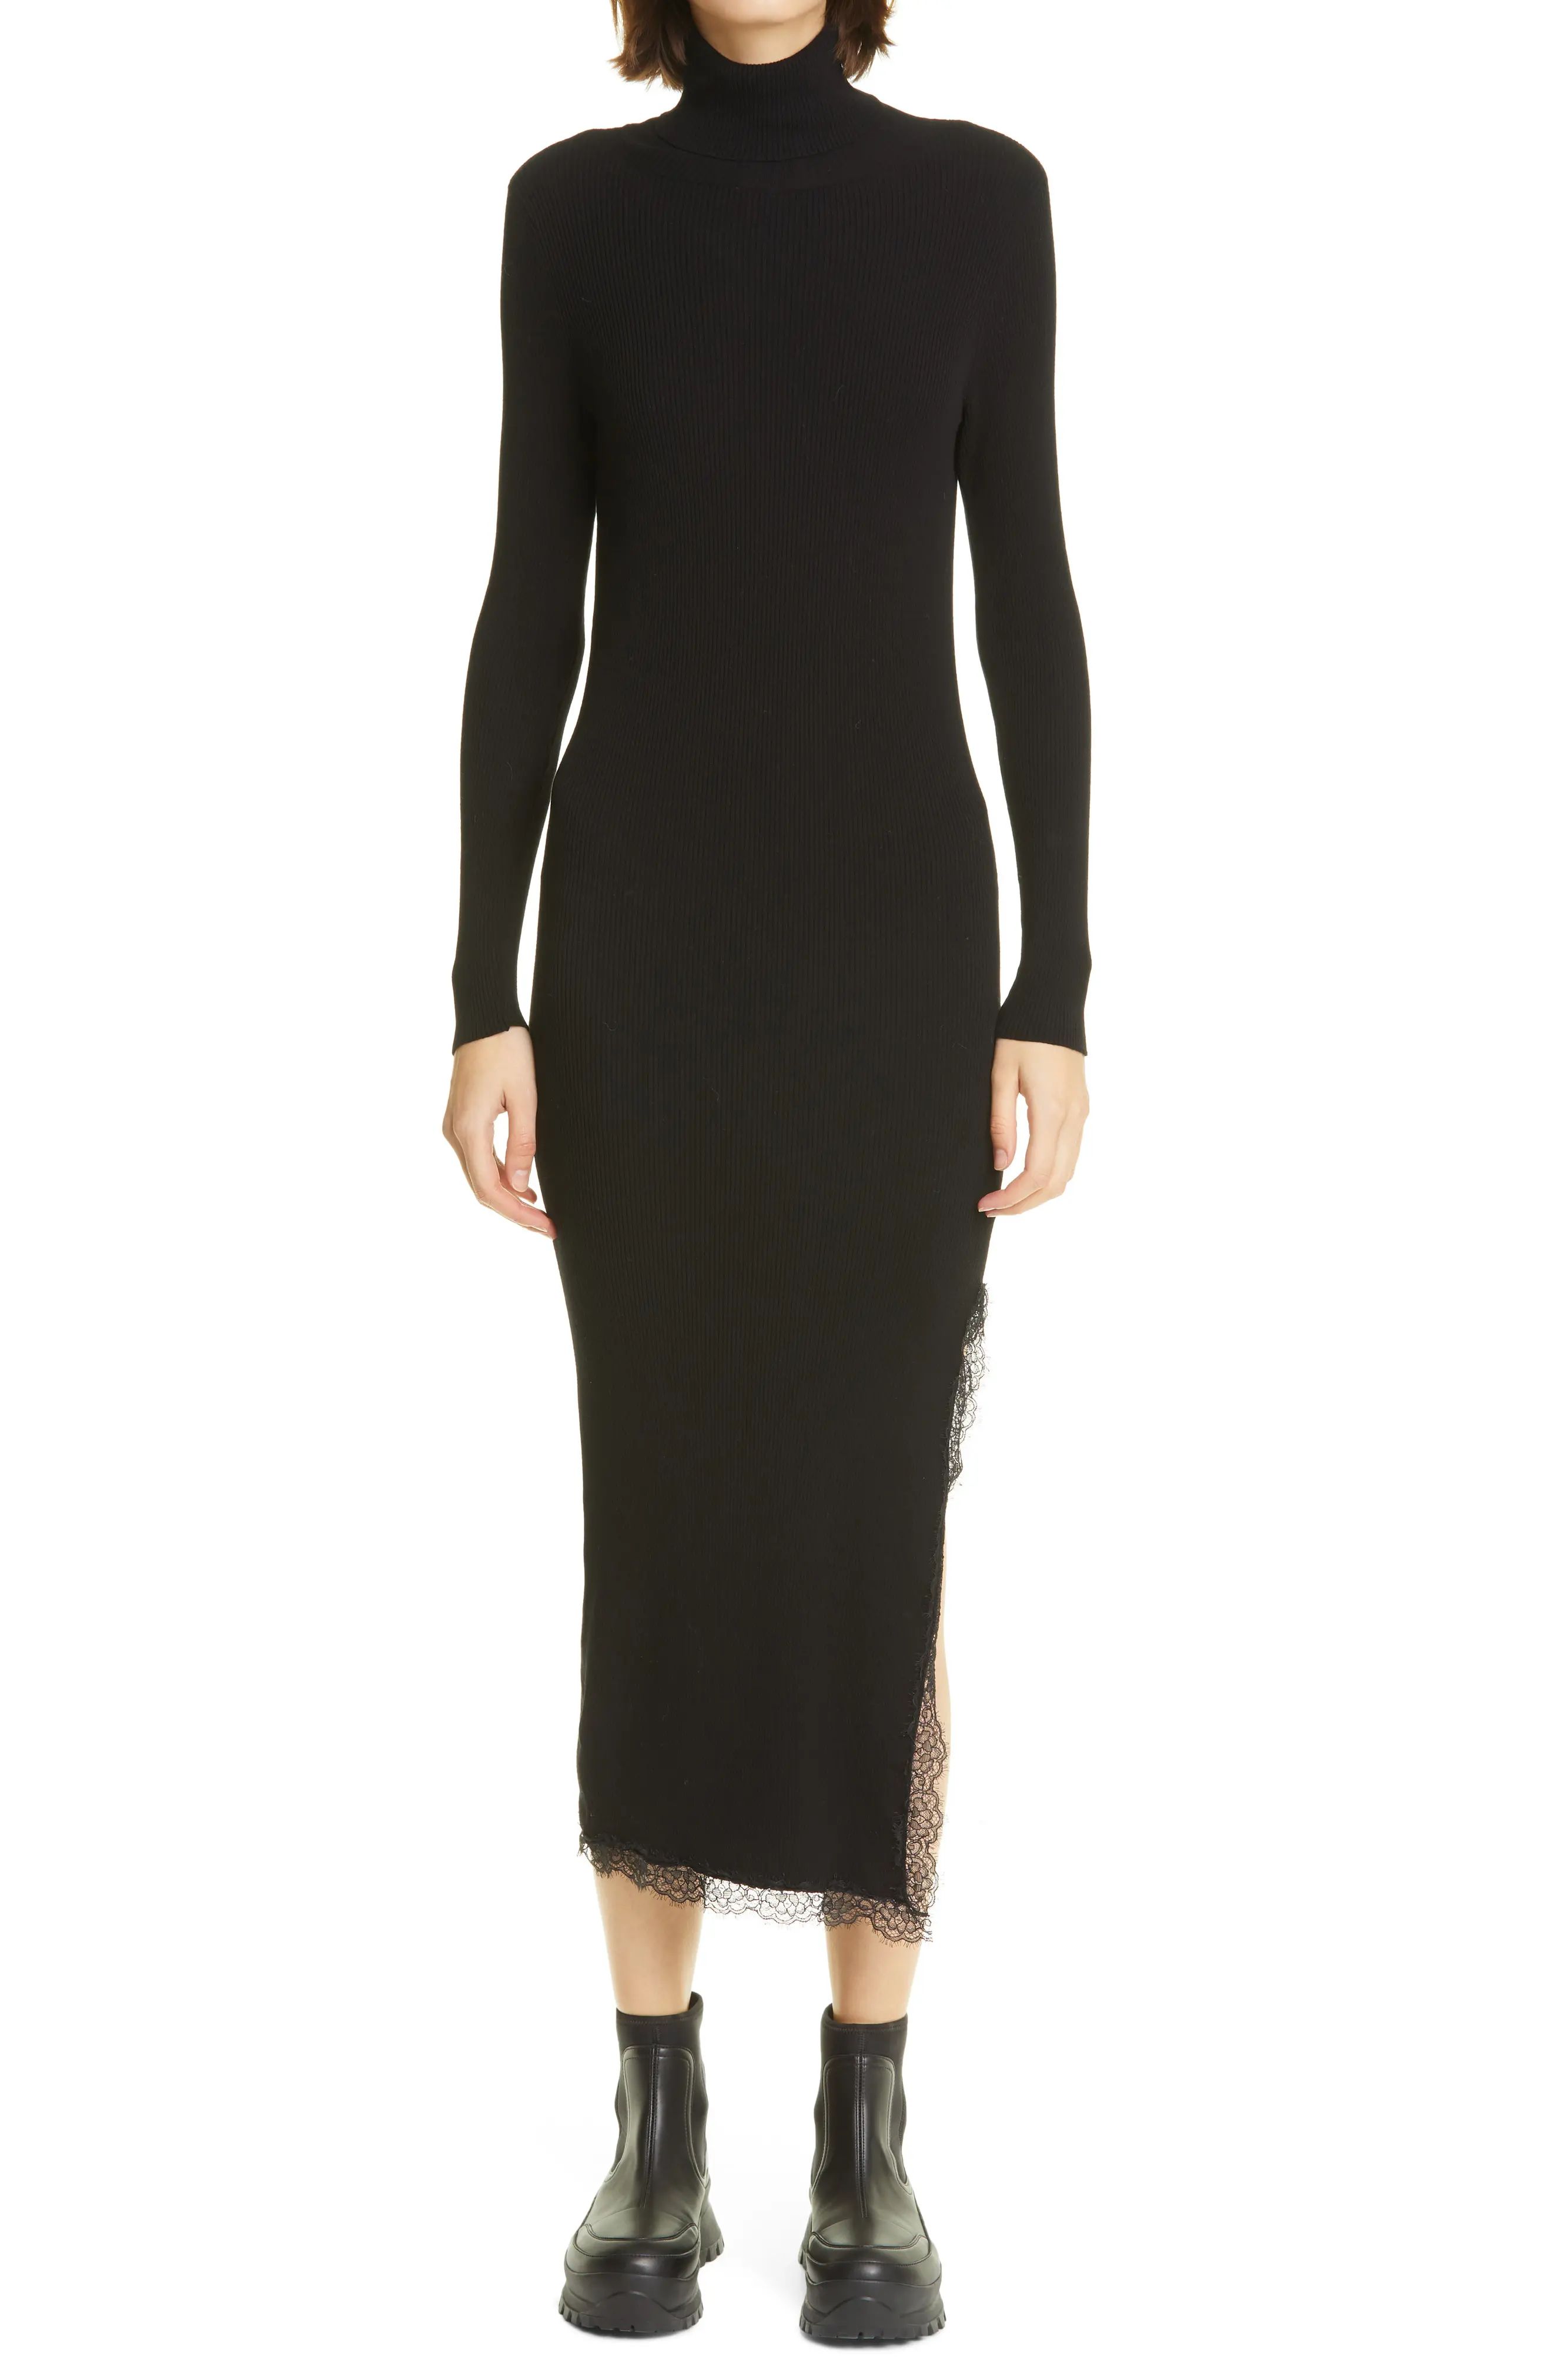 Women's Red Valentino Lace Trim Turtleneck Long Sleeve Sweater Dress, Size X-Small - Black | Nordstrom